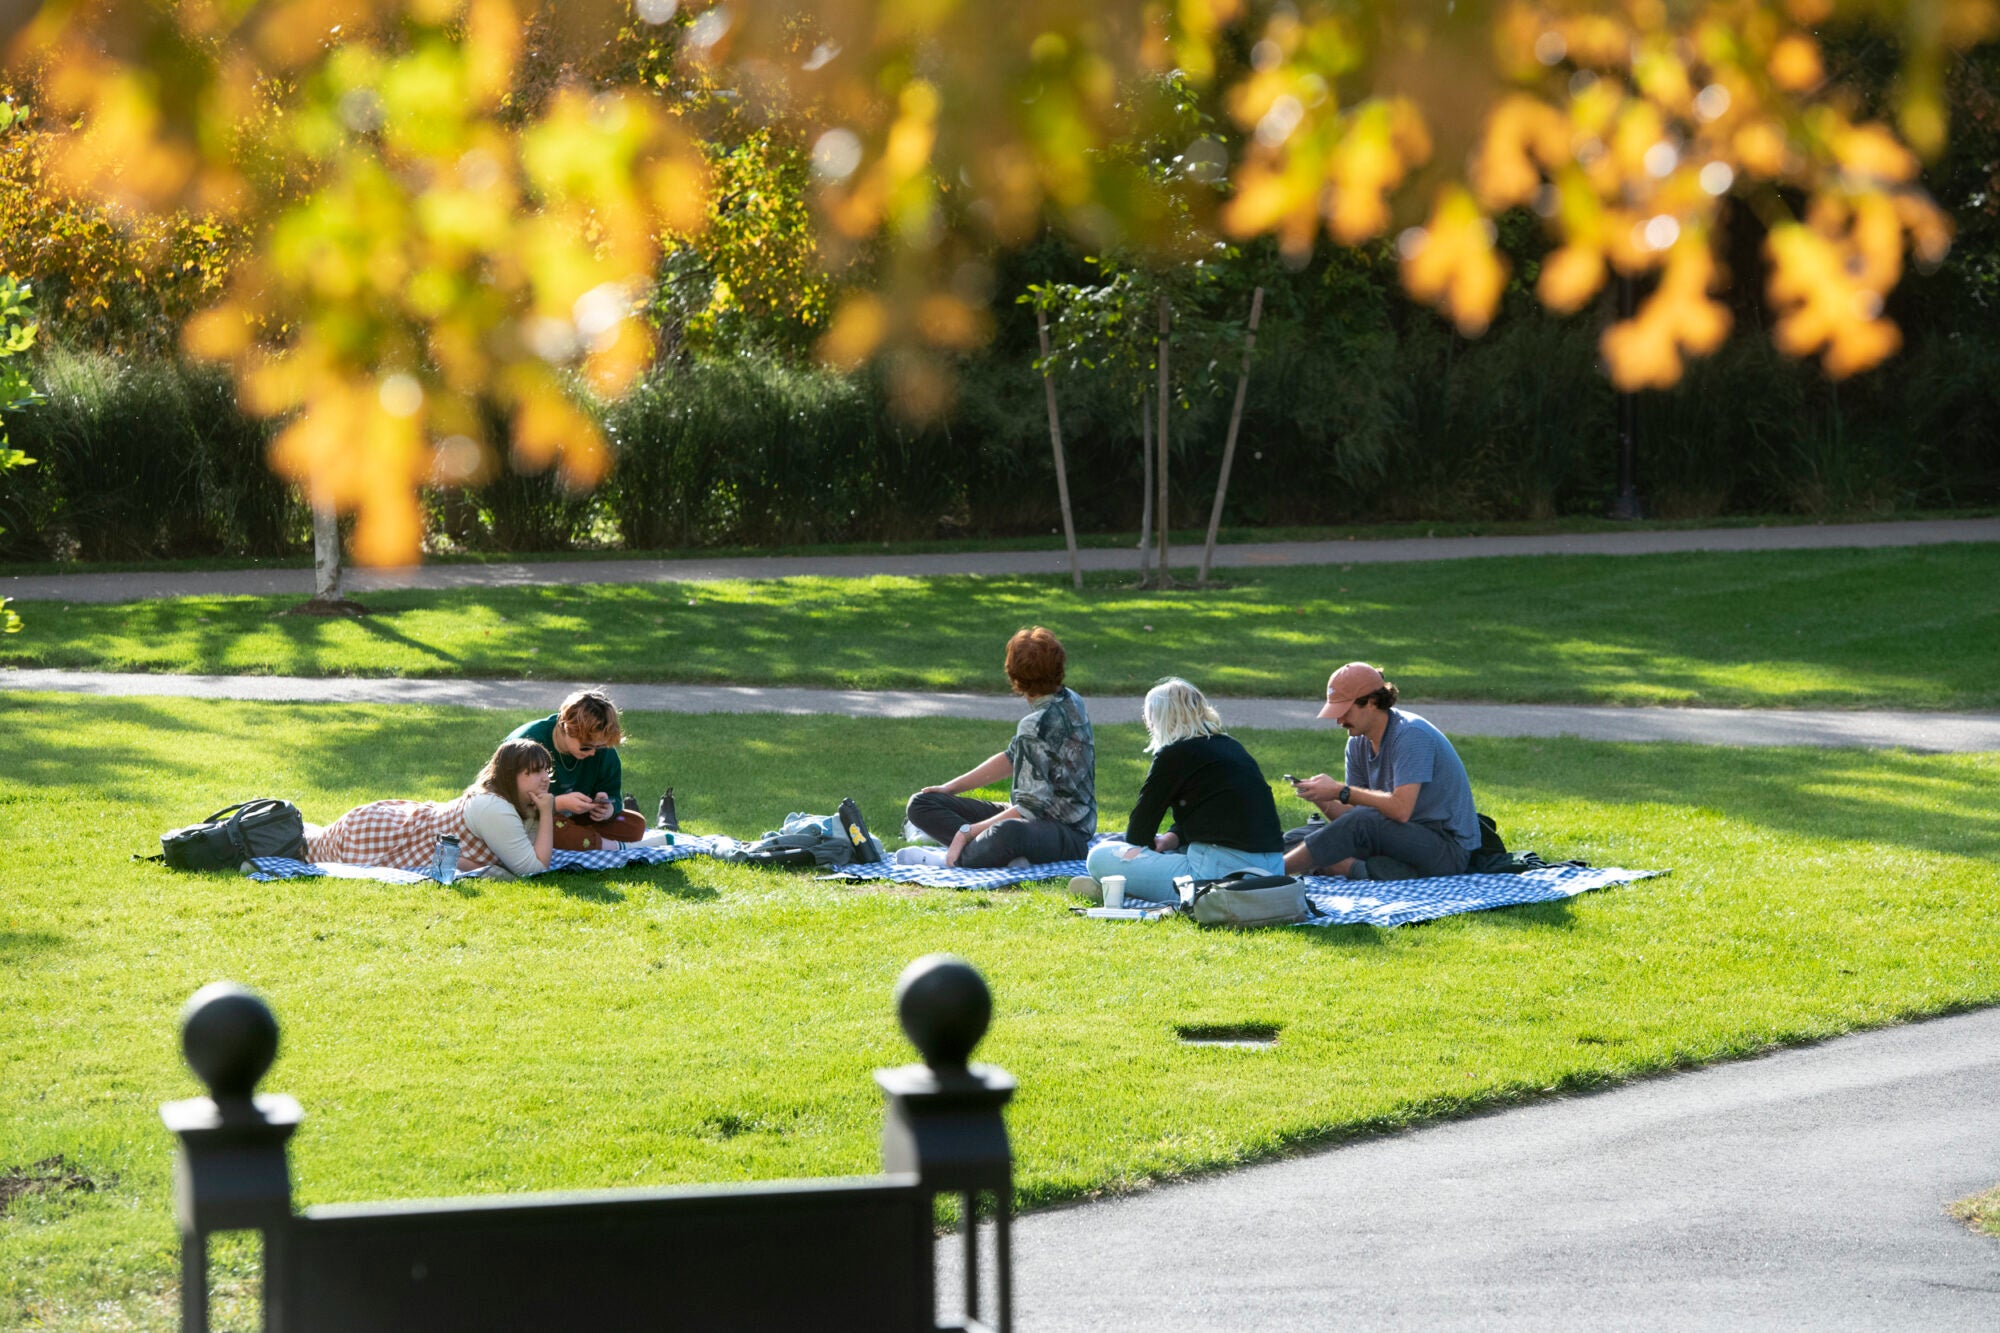 Students sit on a grassy lawn in the fall sunshine studying